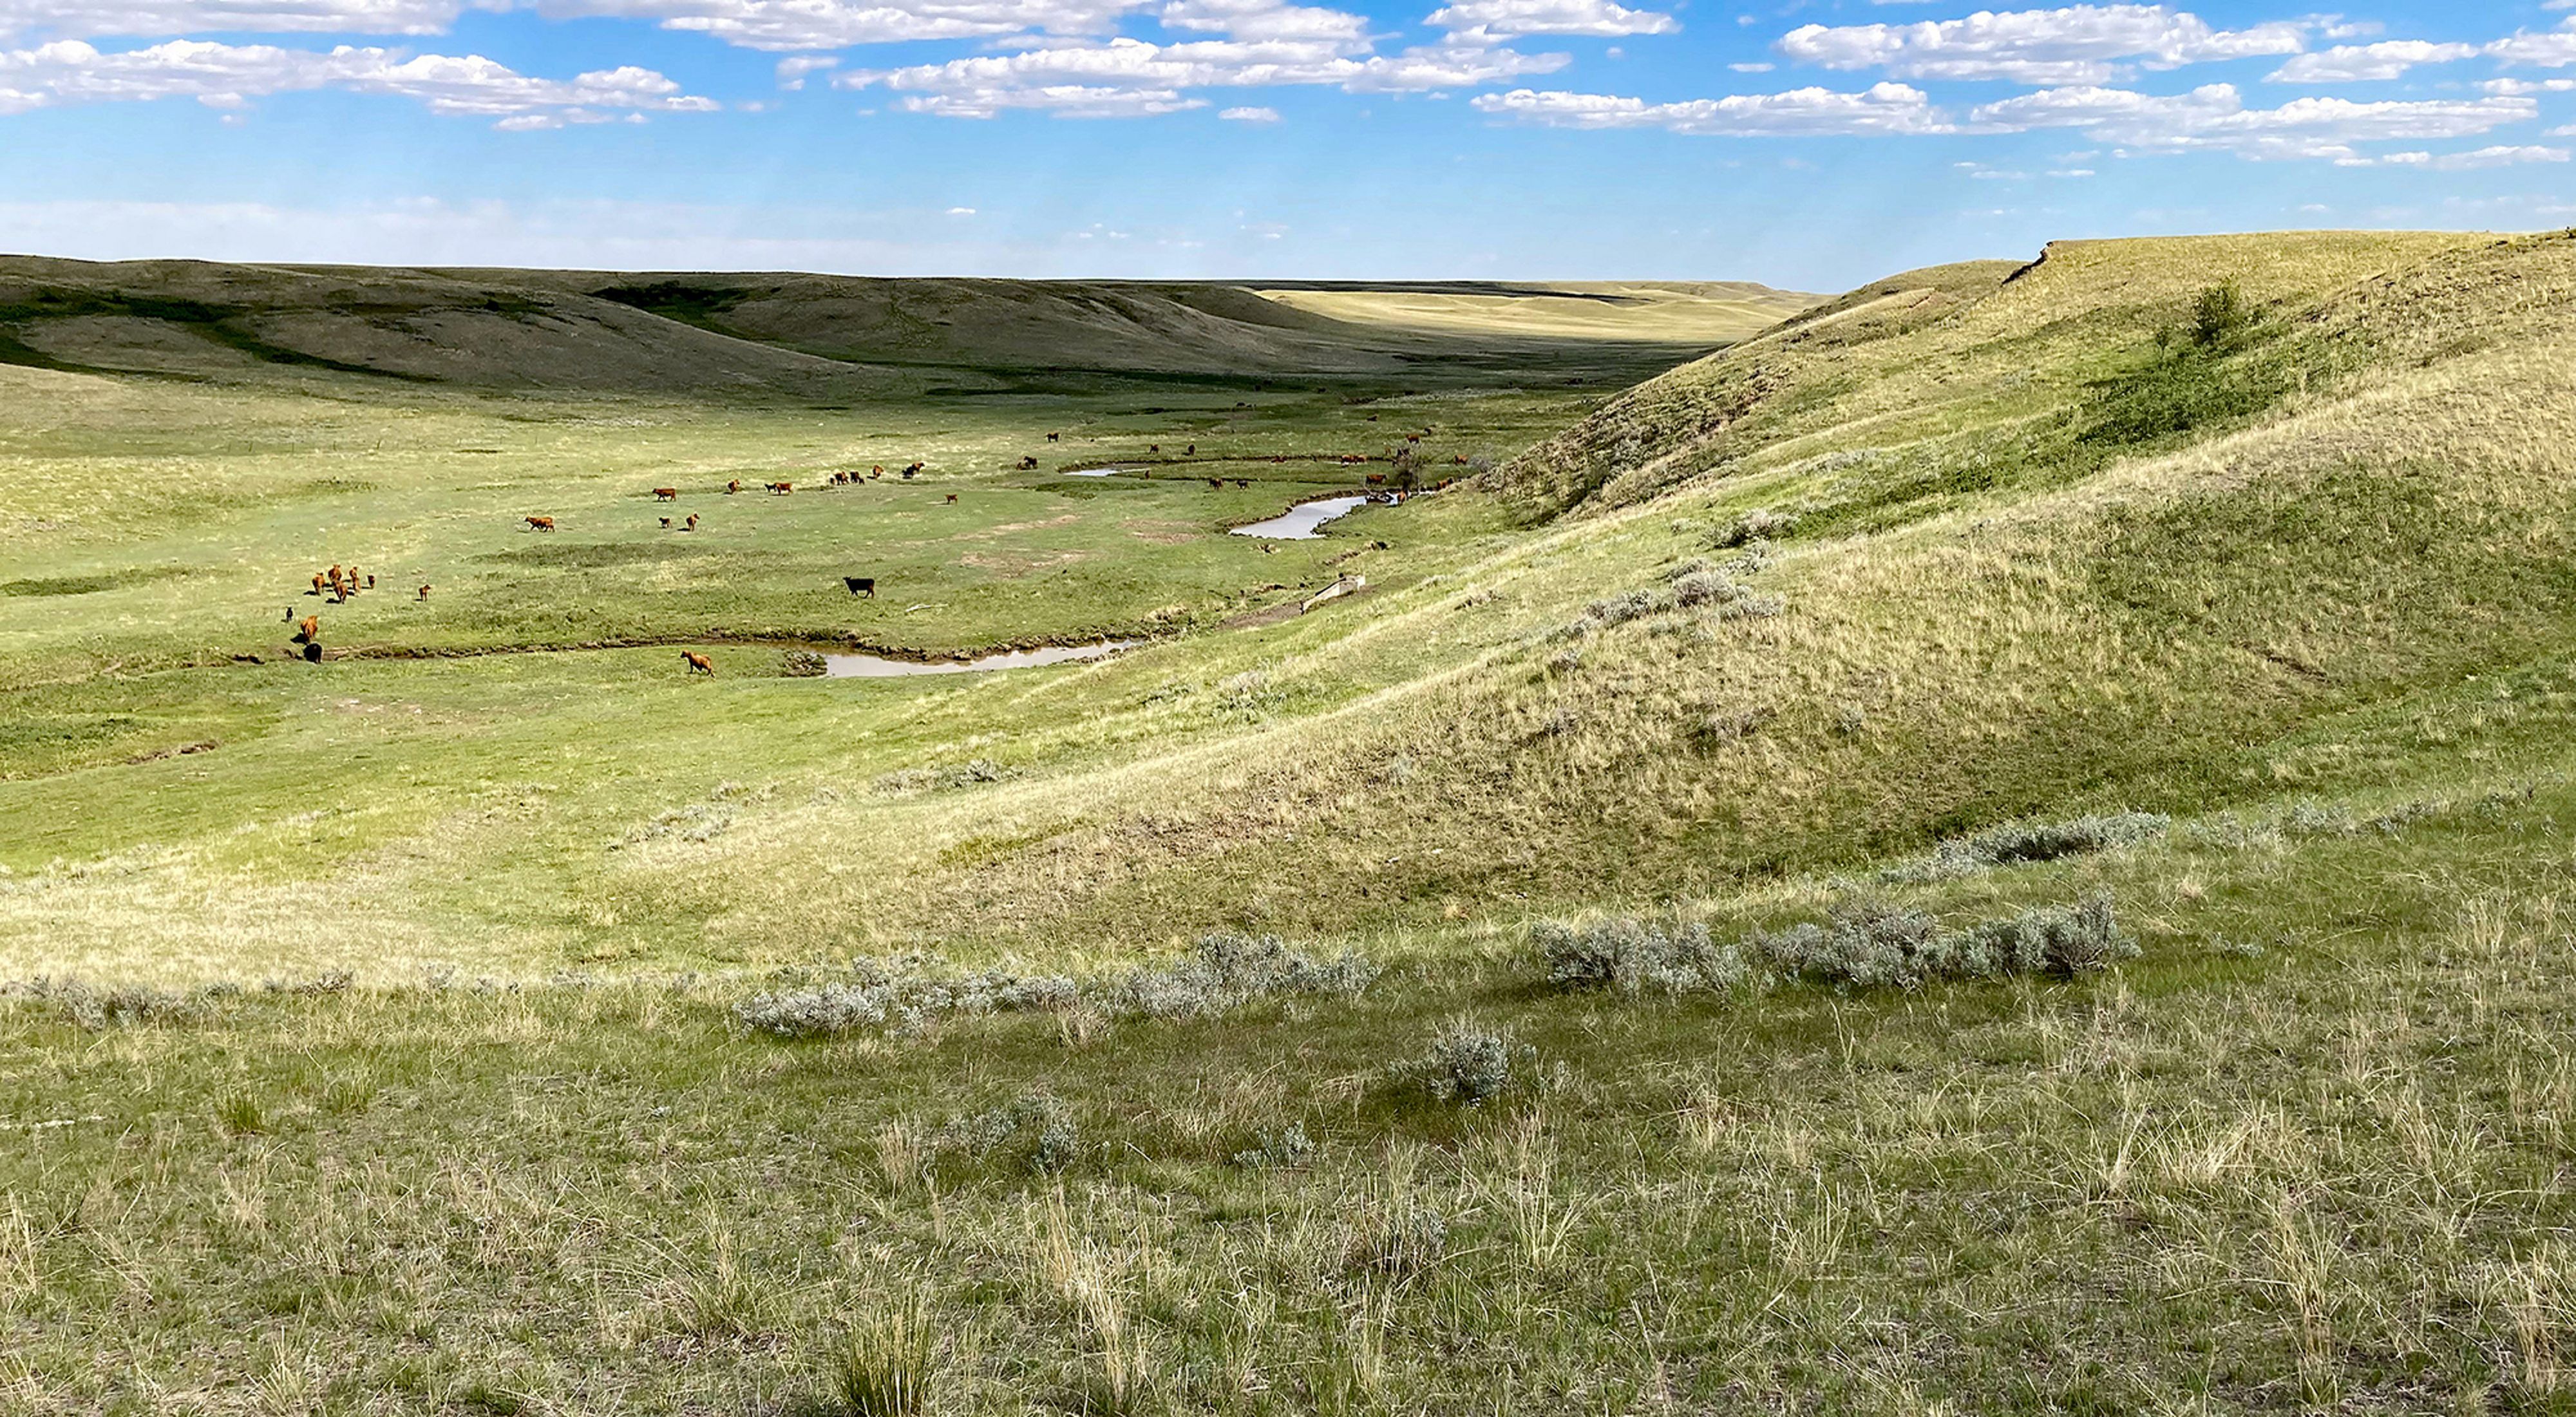 Gently sloped verdant valley with cattle grazing around spring-fed wetlands and stream.